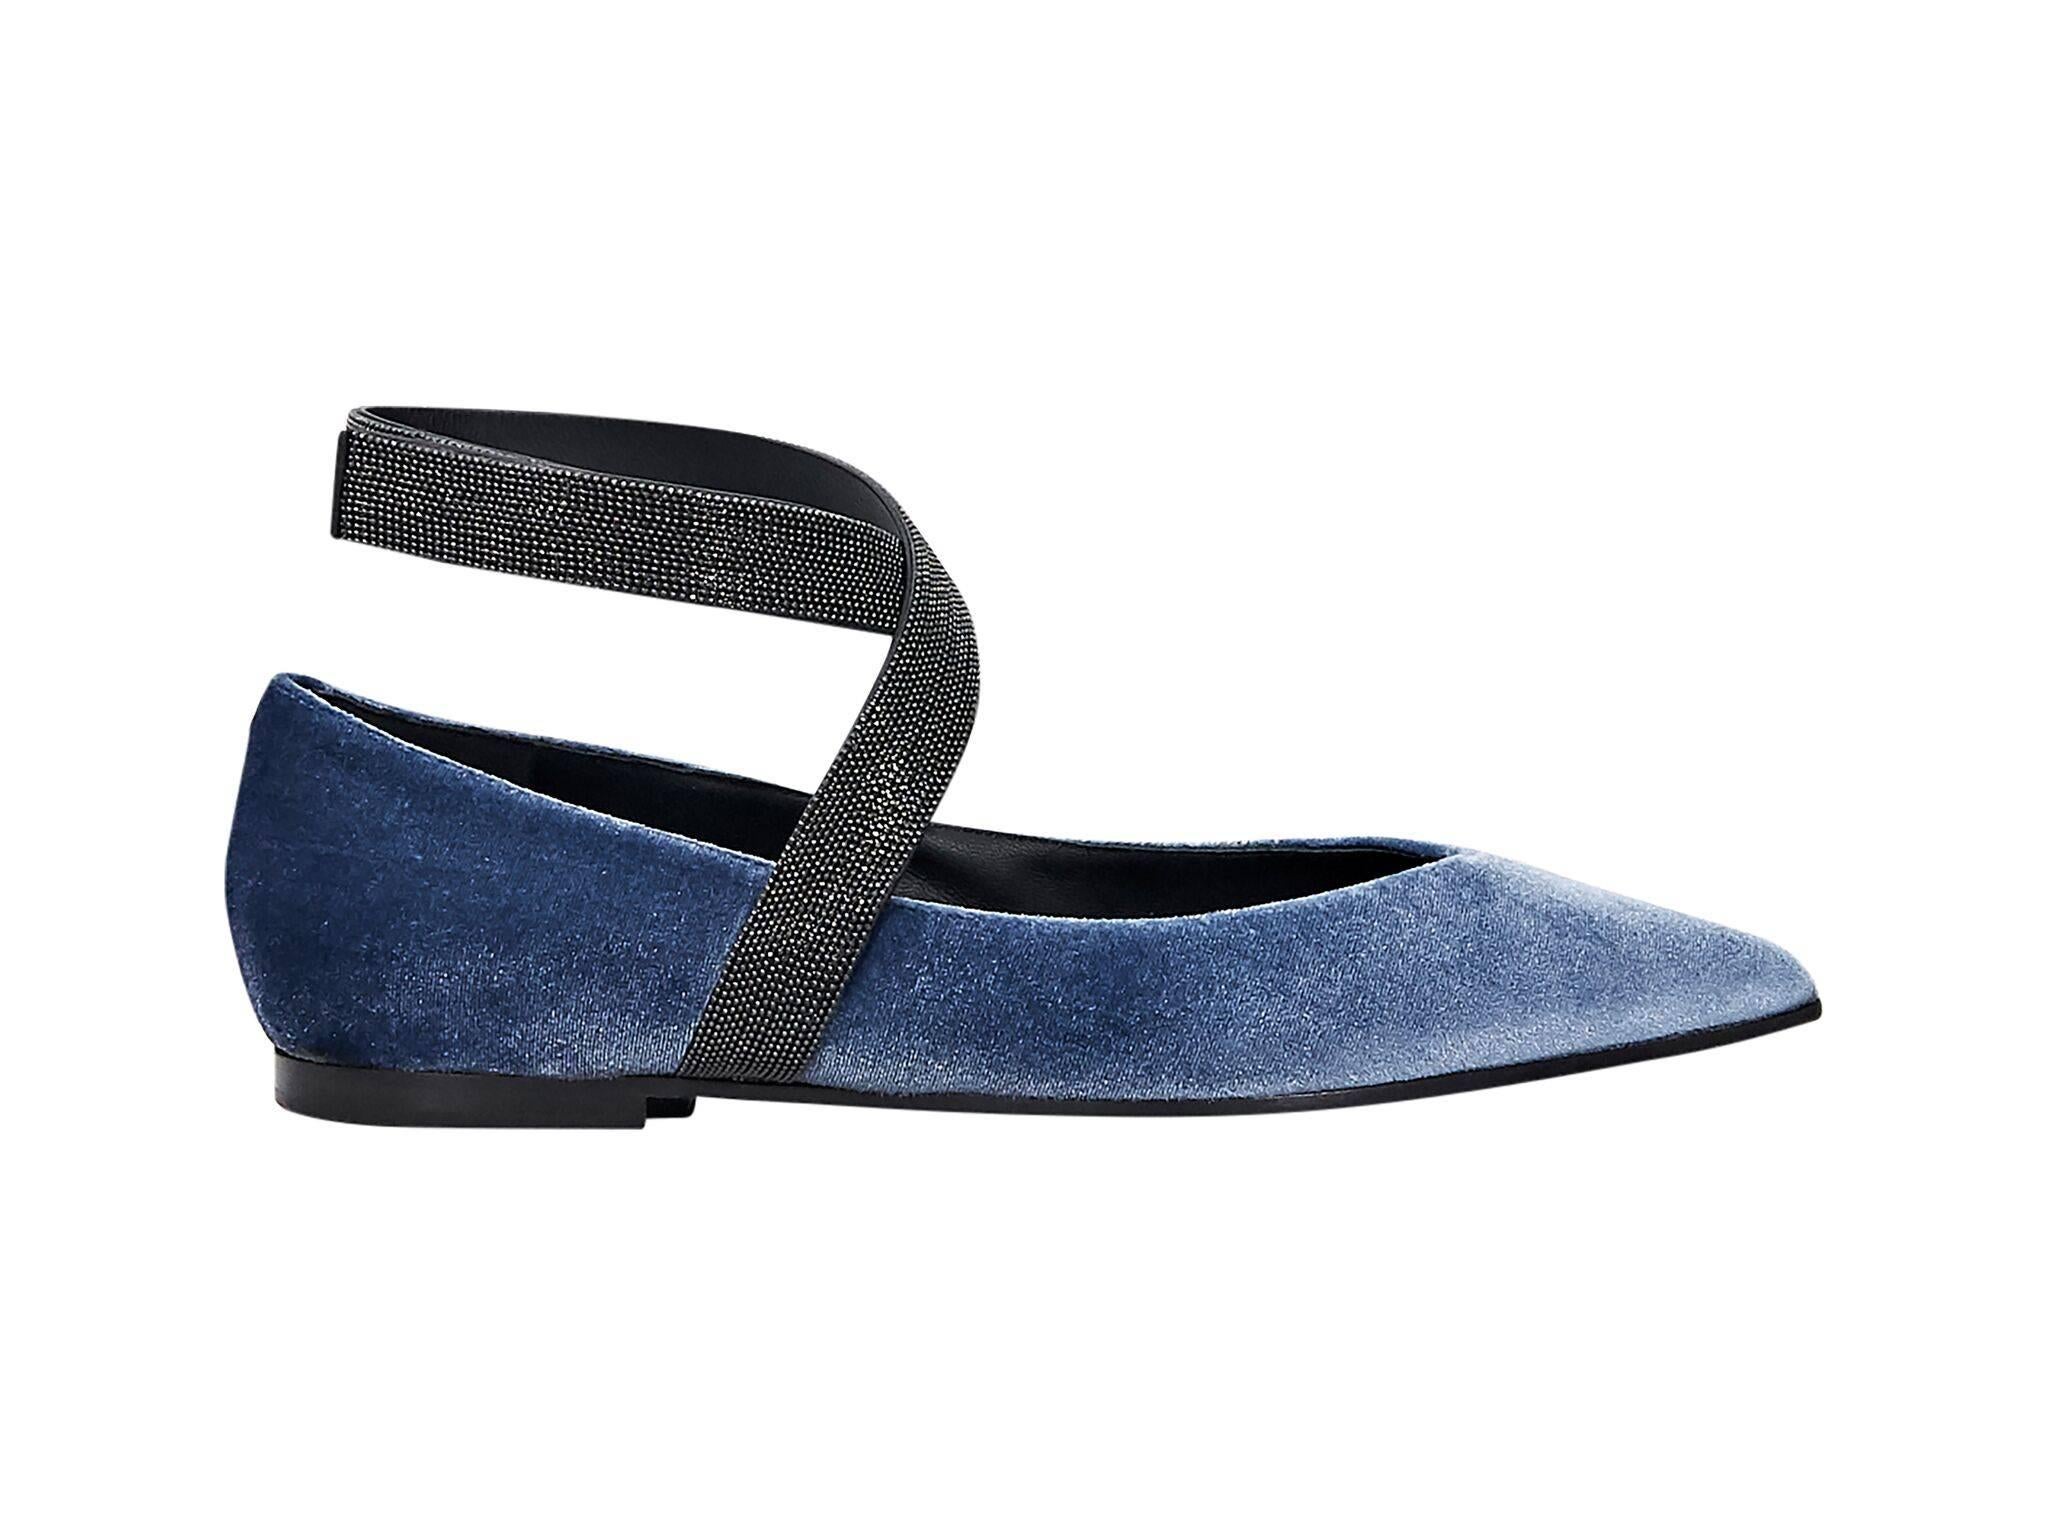 Product details:  Blue velvet skimmer flats by Brunello Cucinelli.  Crisscross embellished ankle strap.  Point toe.  
Condition: Pre-owned. Very good.
Est. Retail $1,295